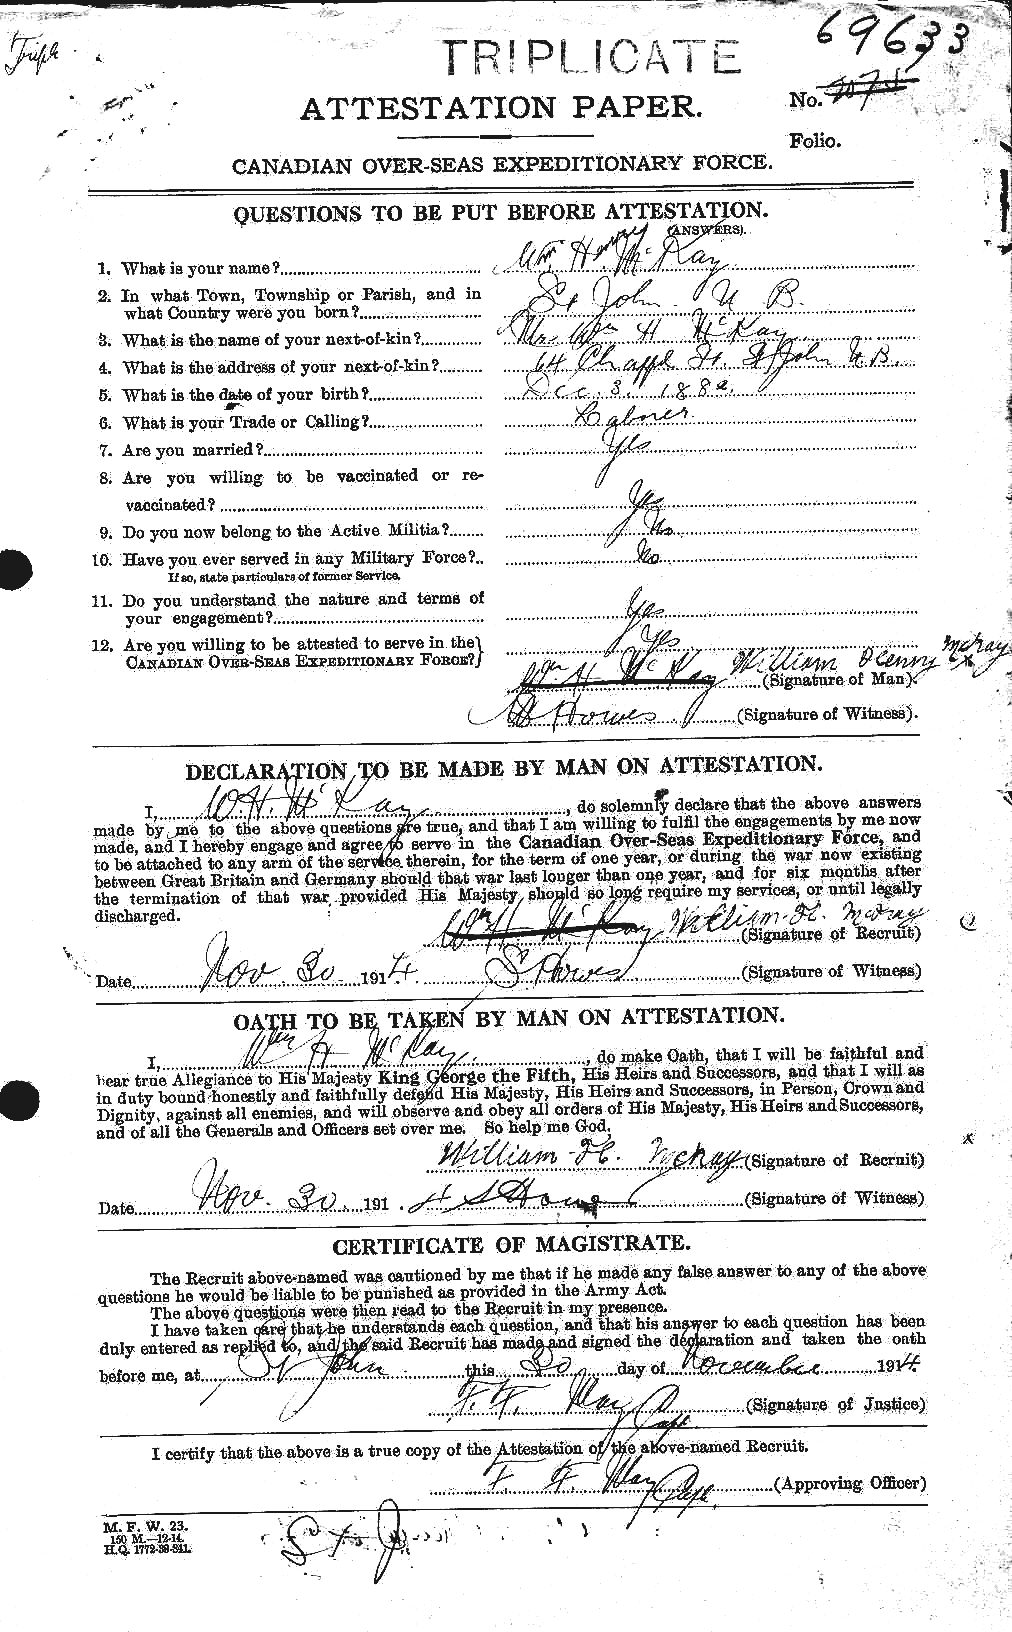 Personnel Records of the First World War - CEF 530291a